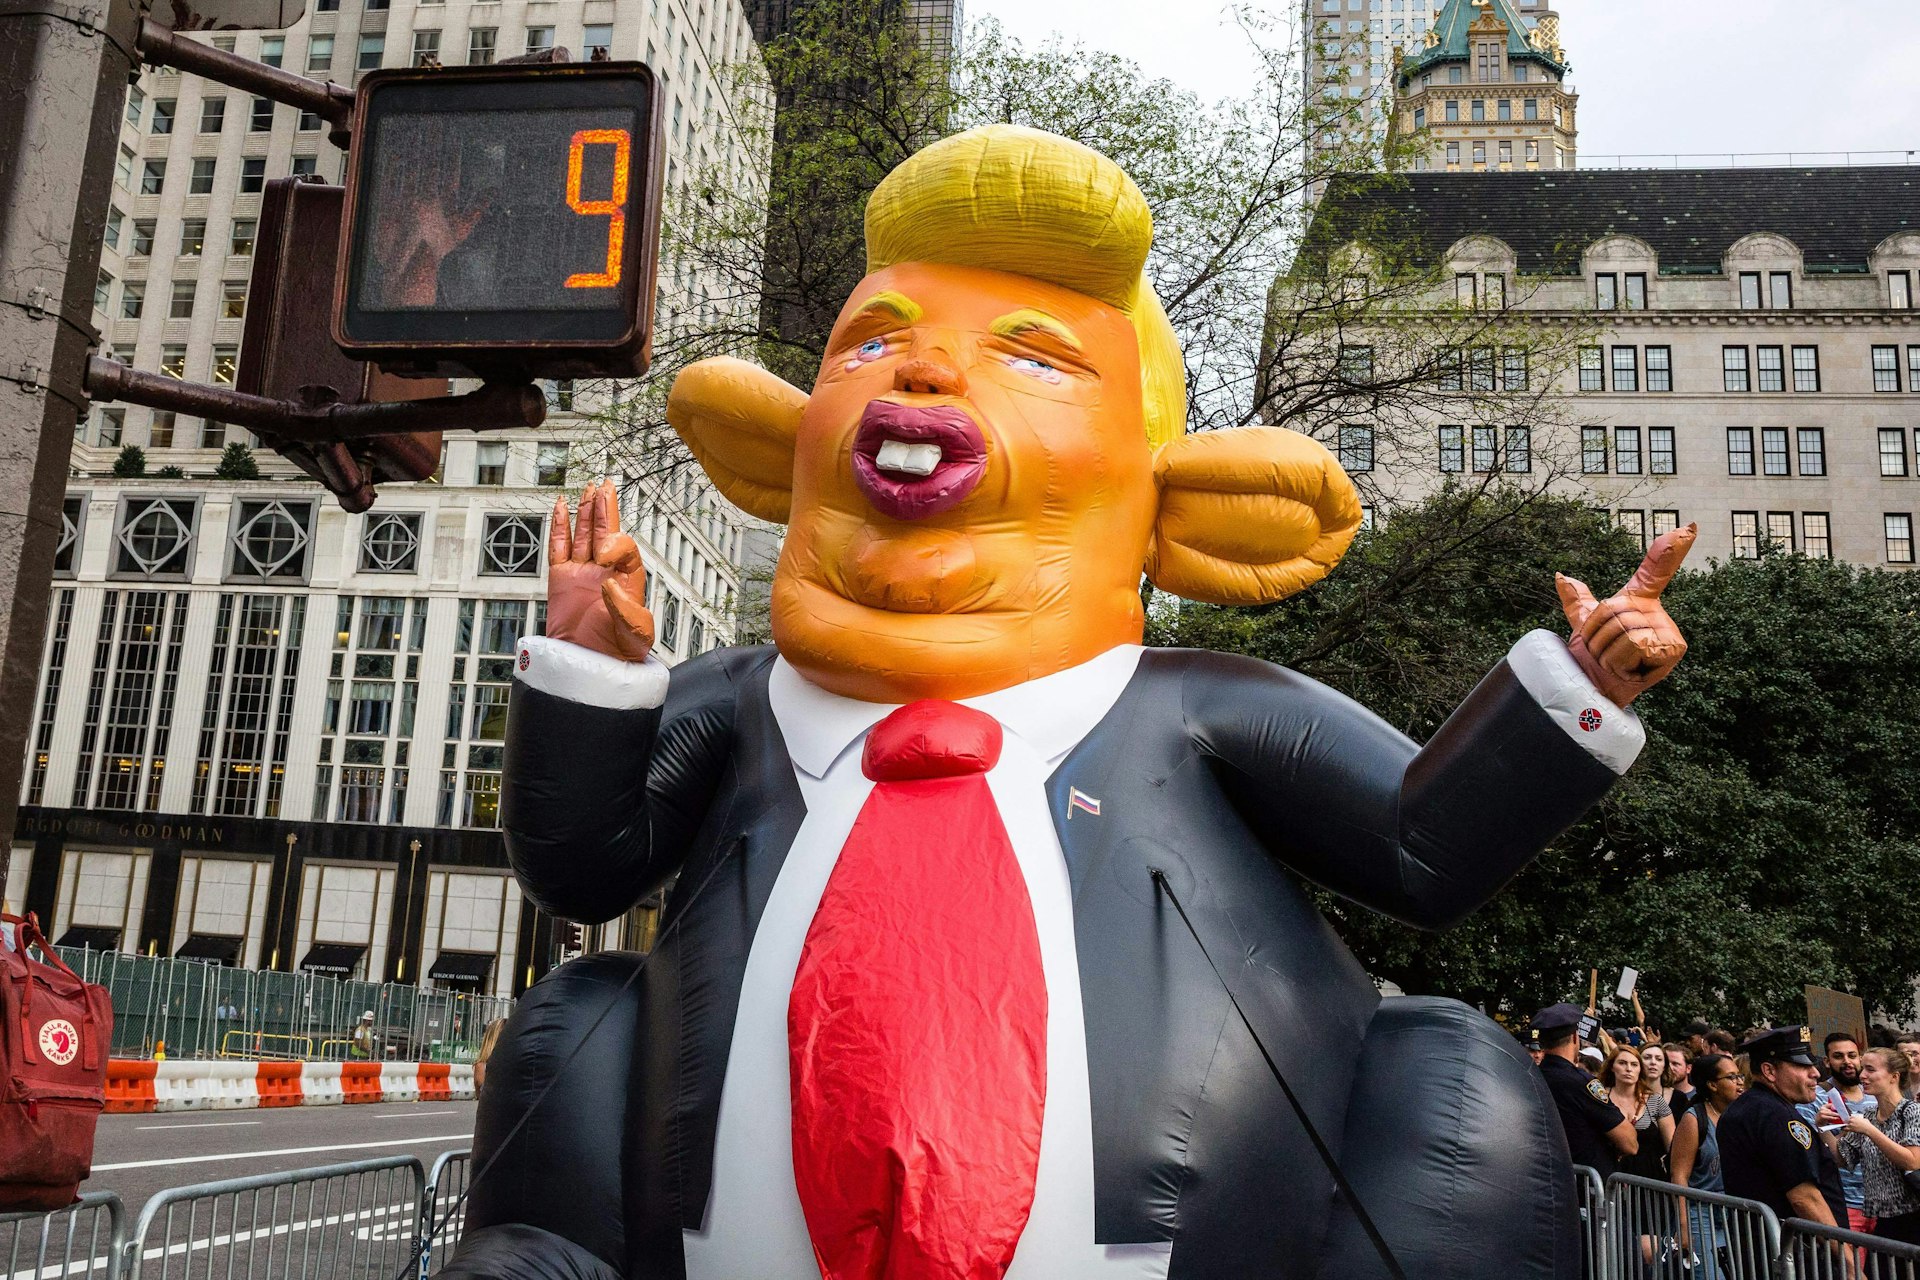 Donald Trump's state visit to Britain has been cancelled